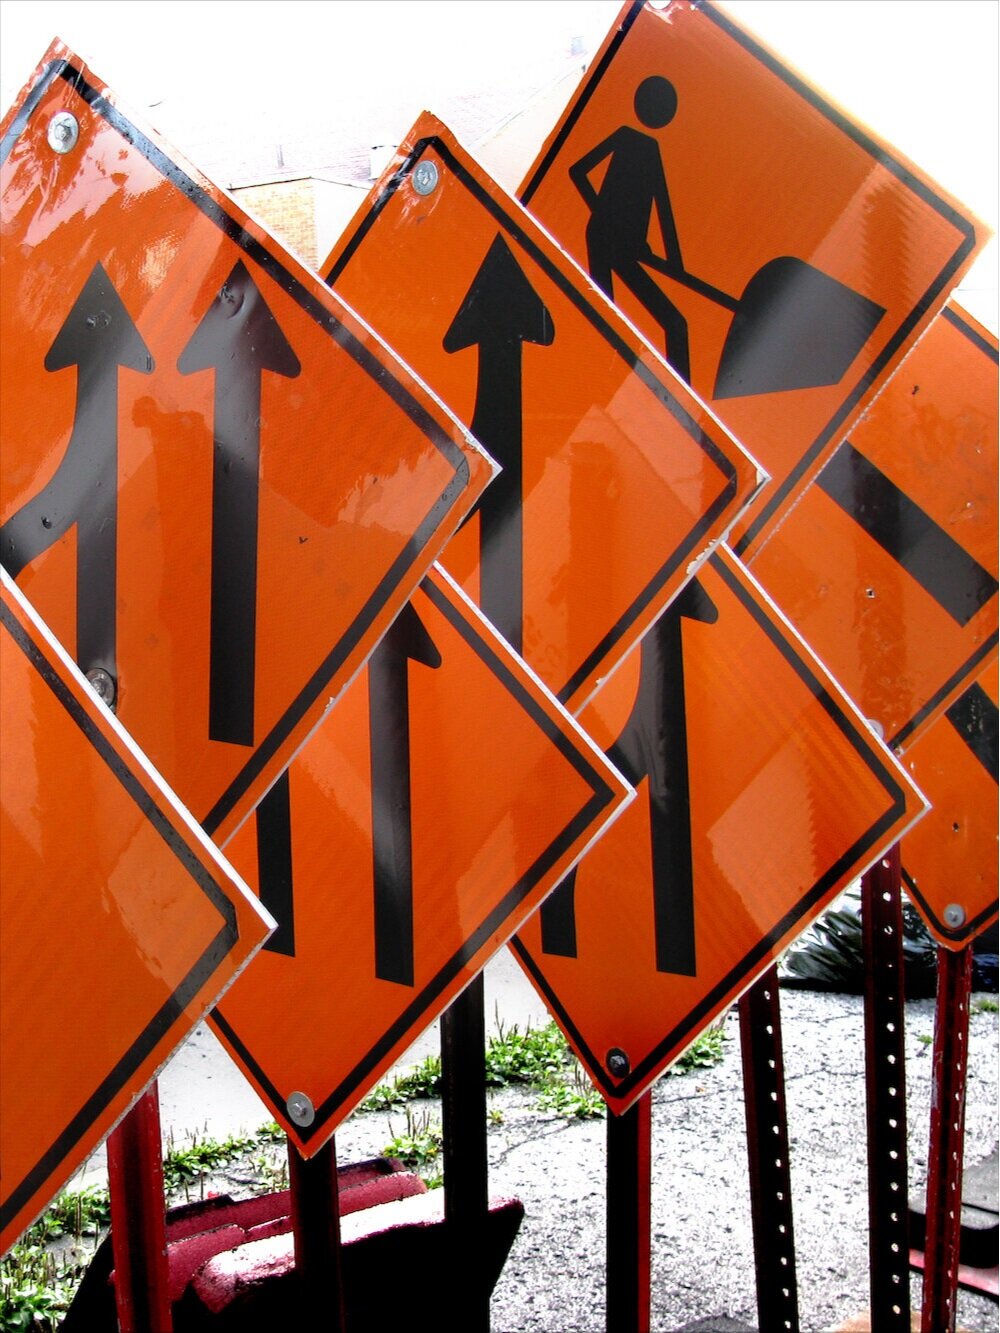 "Construction Signs"  by  jphilipg  is licensed under  CC BY 2.0